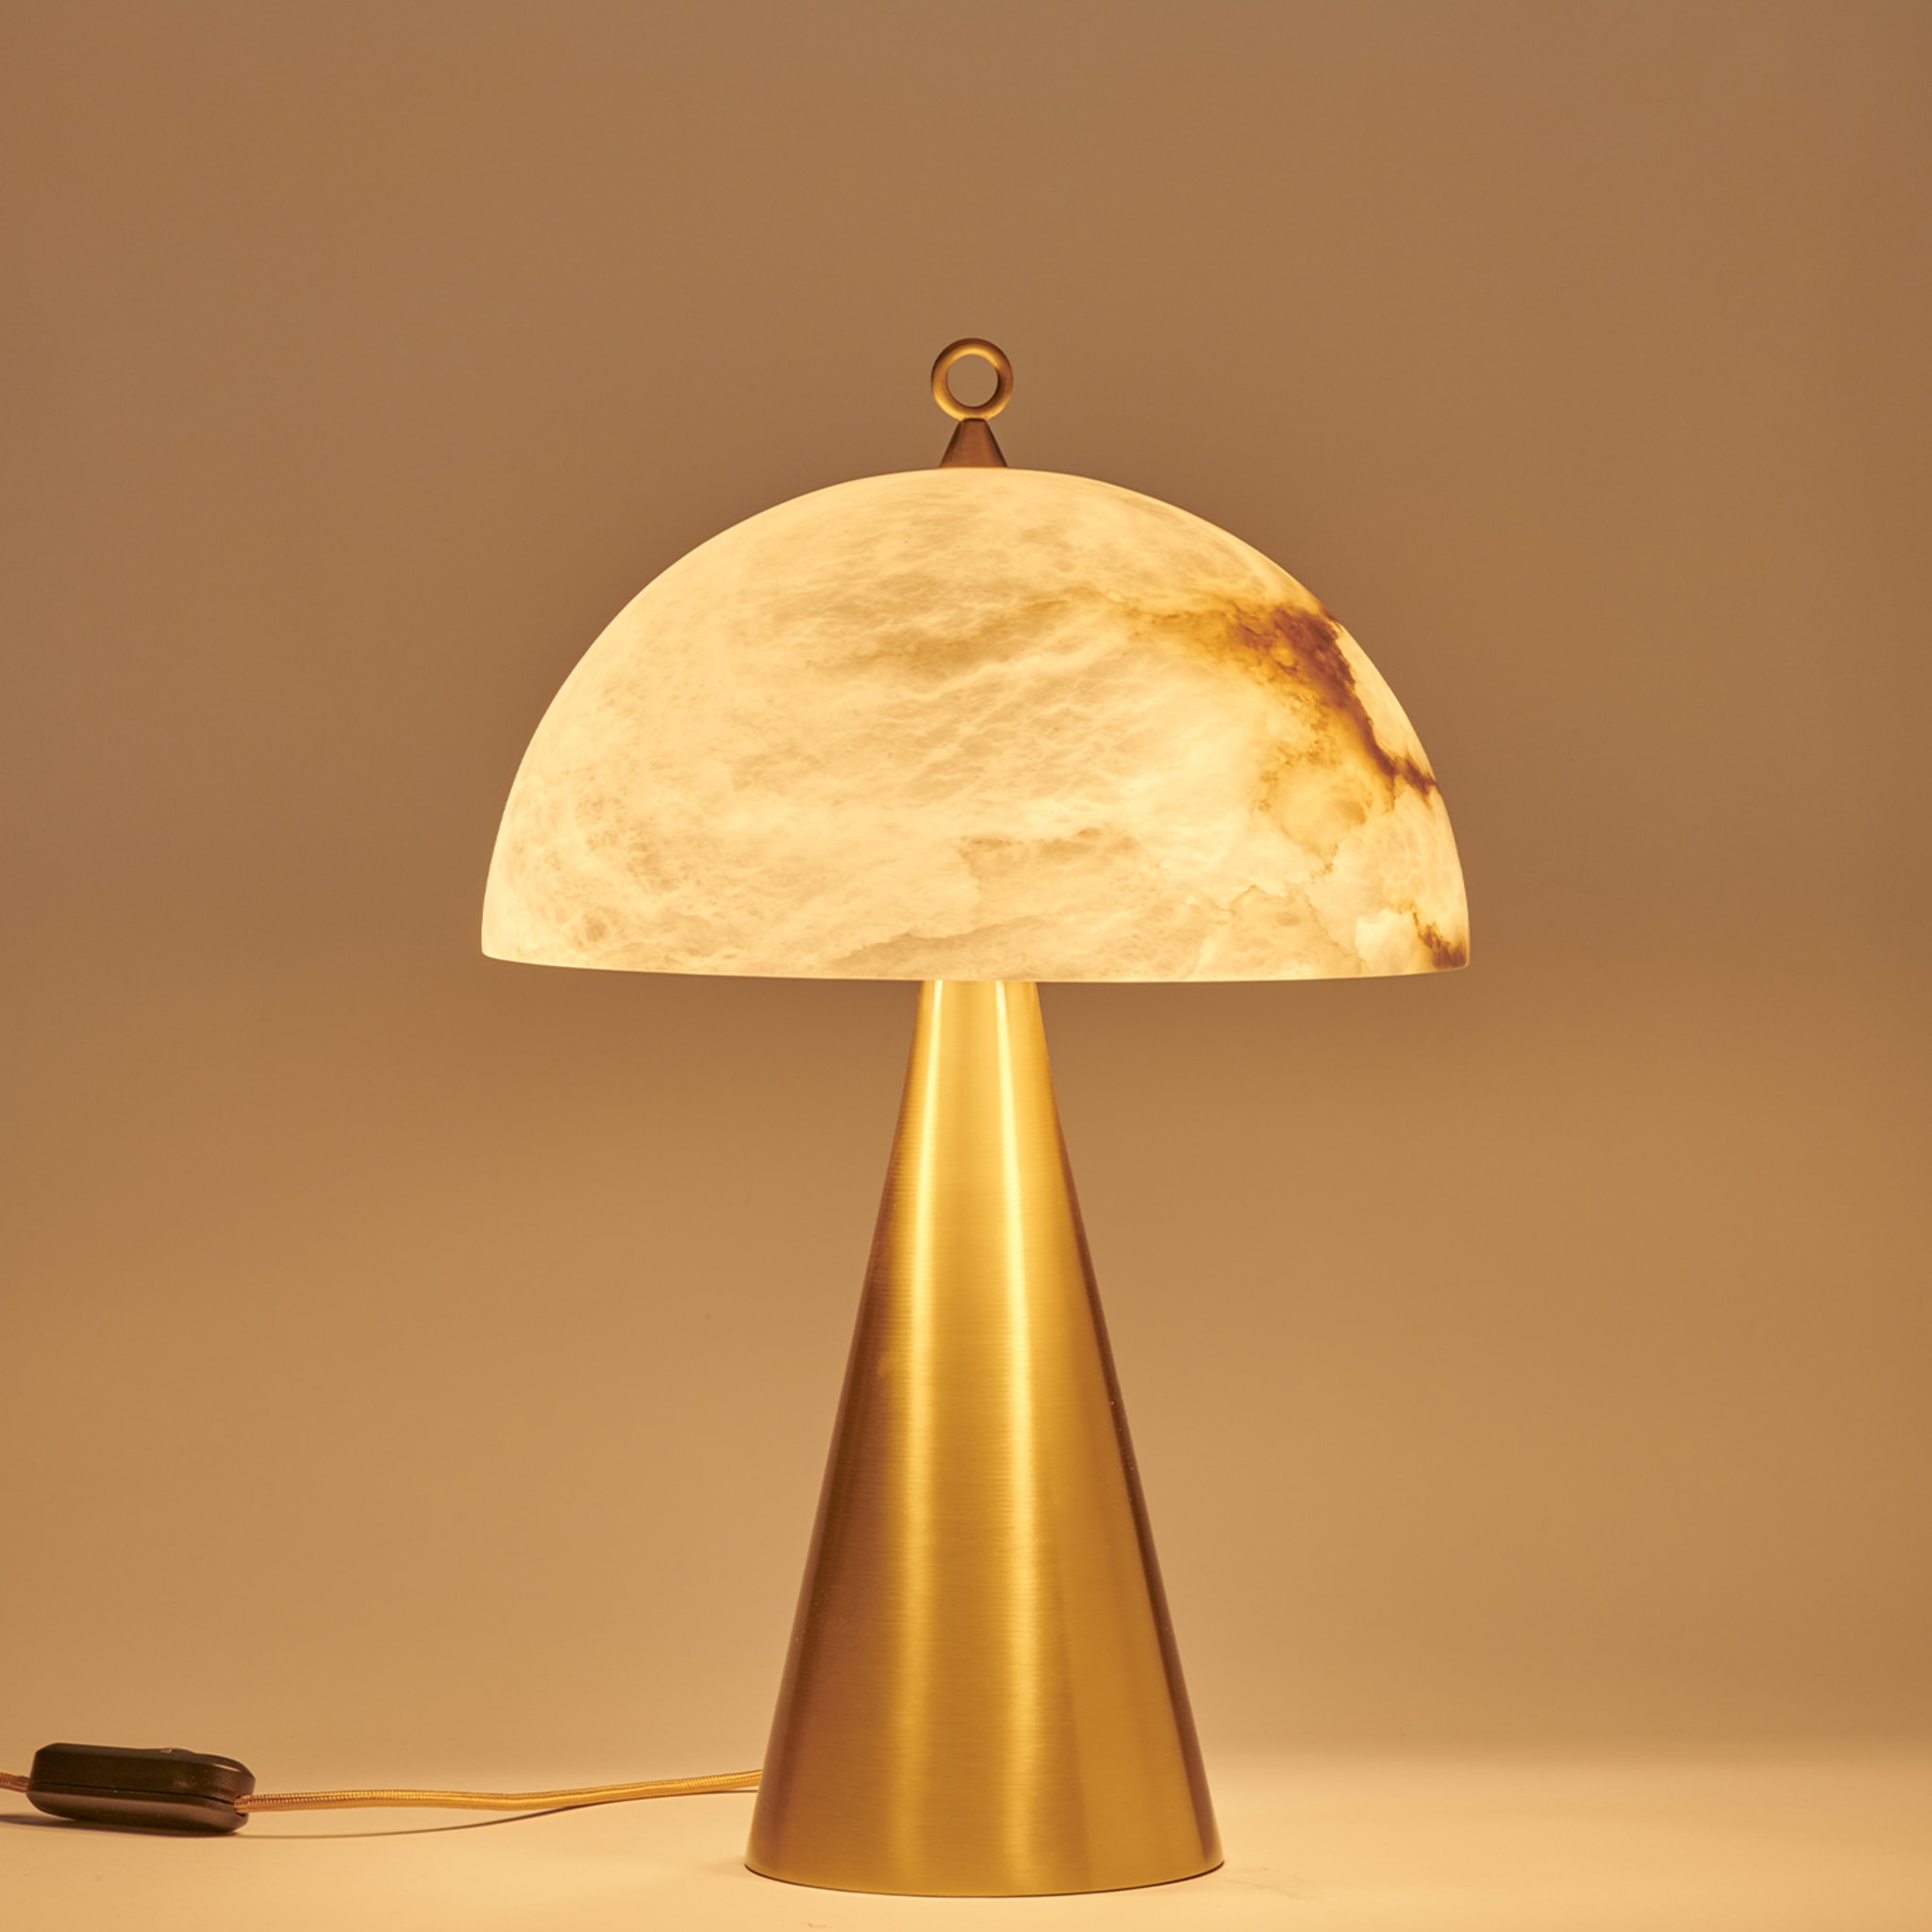 "Fungotto" Table Lamp in Satin Brass and Alabaster - Alternative view 1